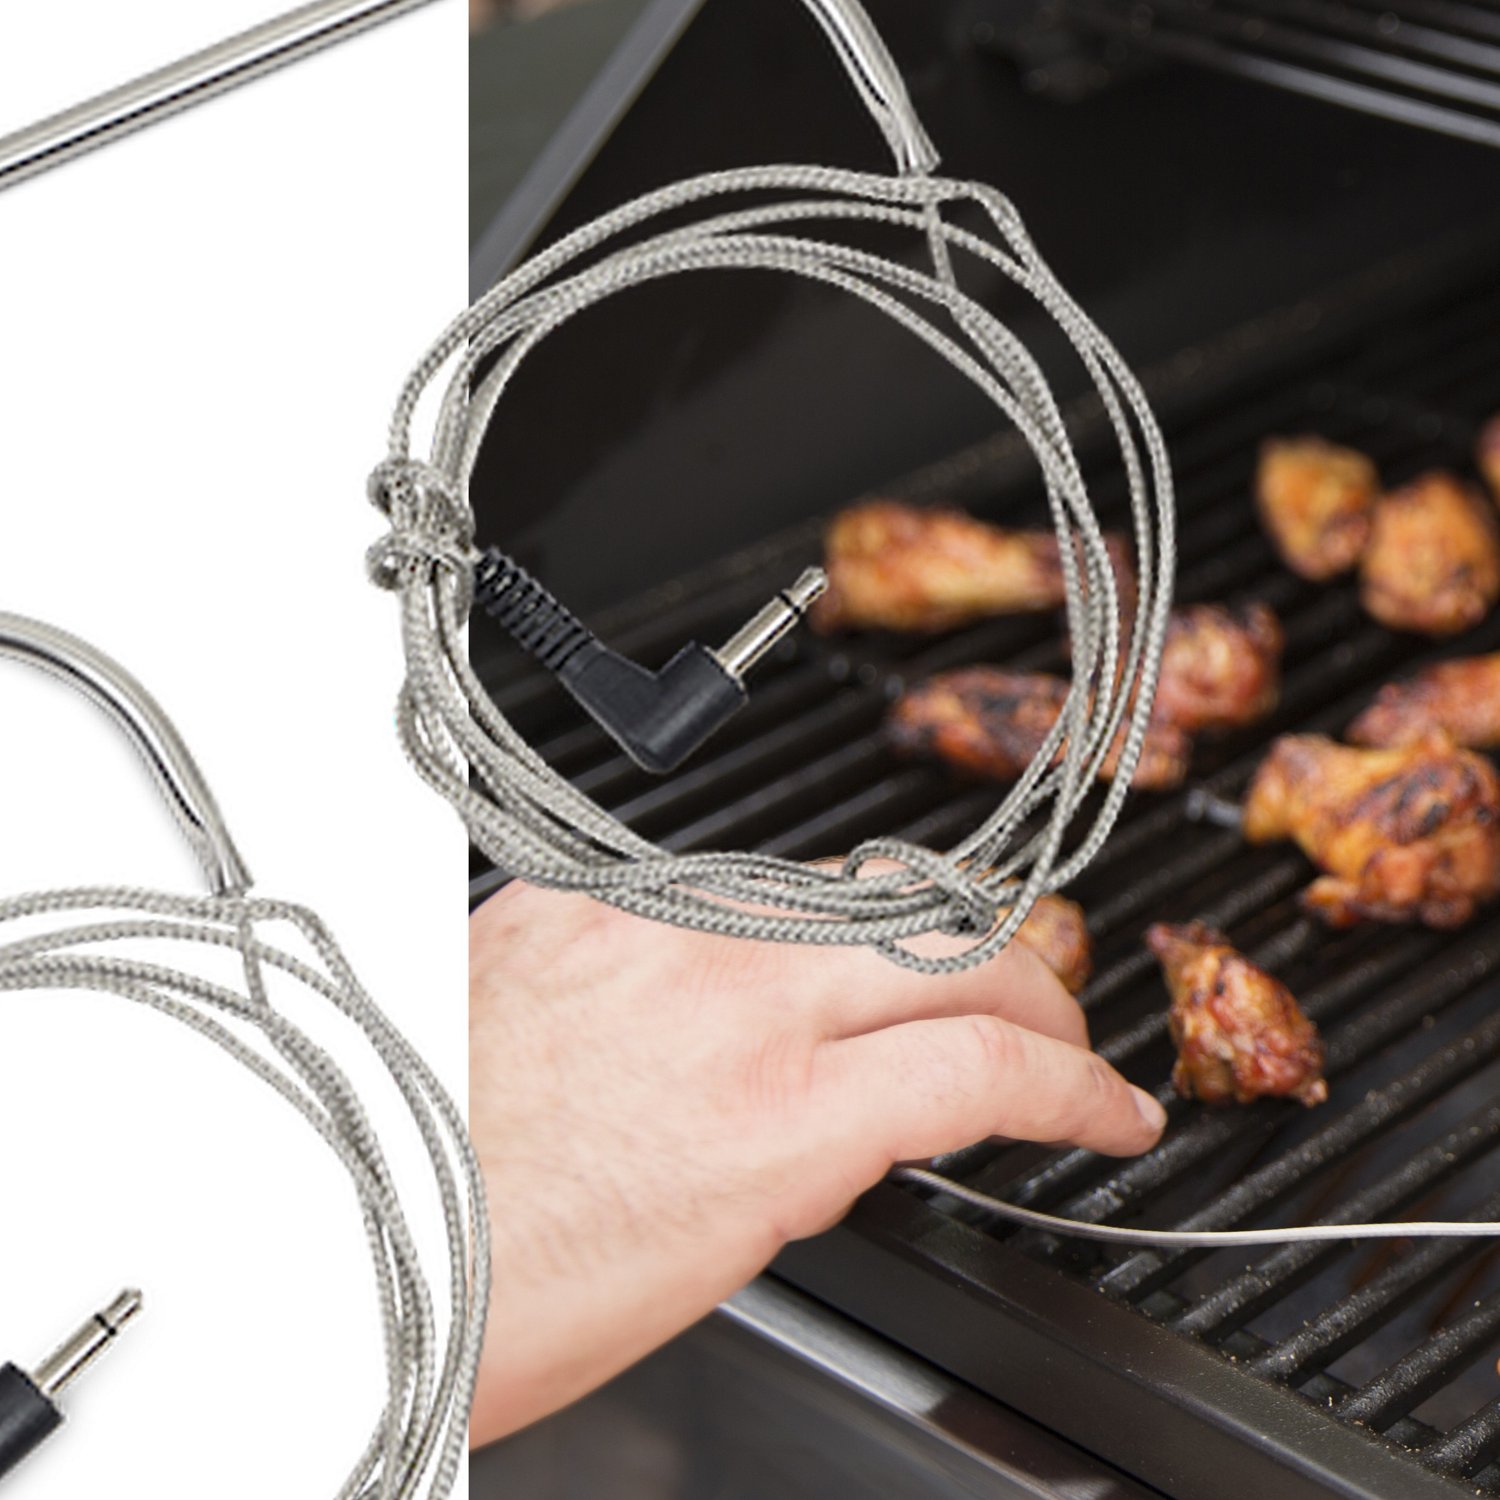  Replacement Meat Probe For Pit Boss Pellet Grill